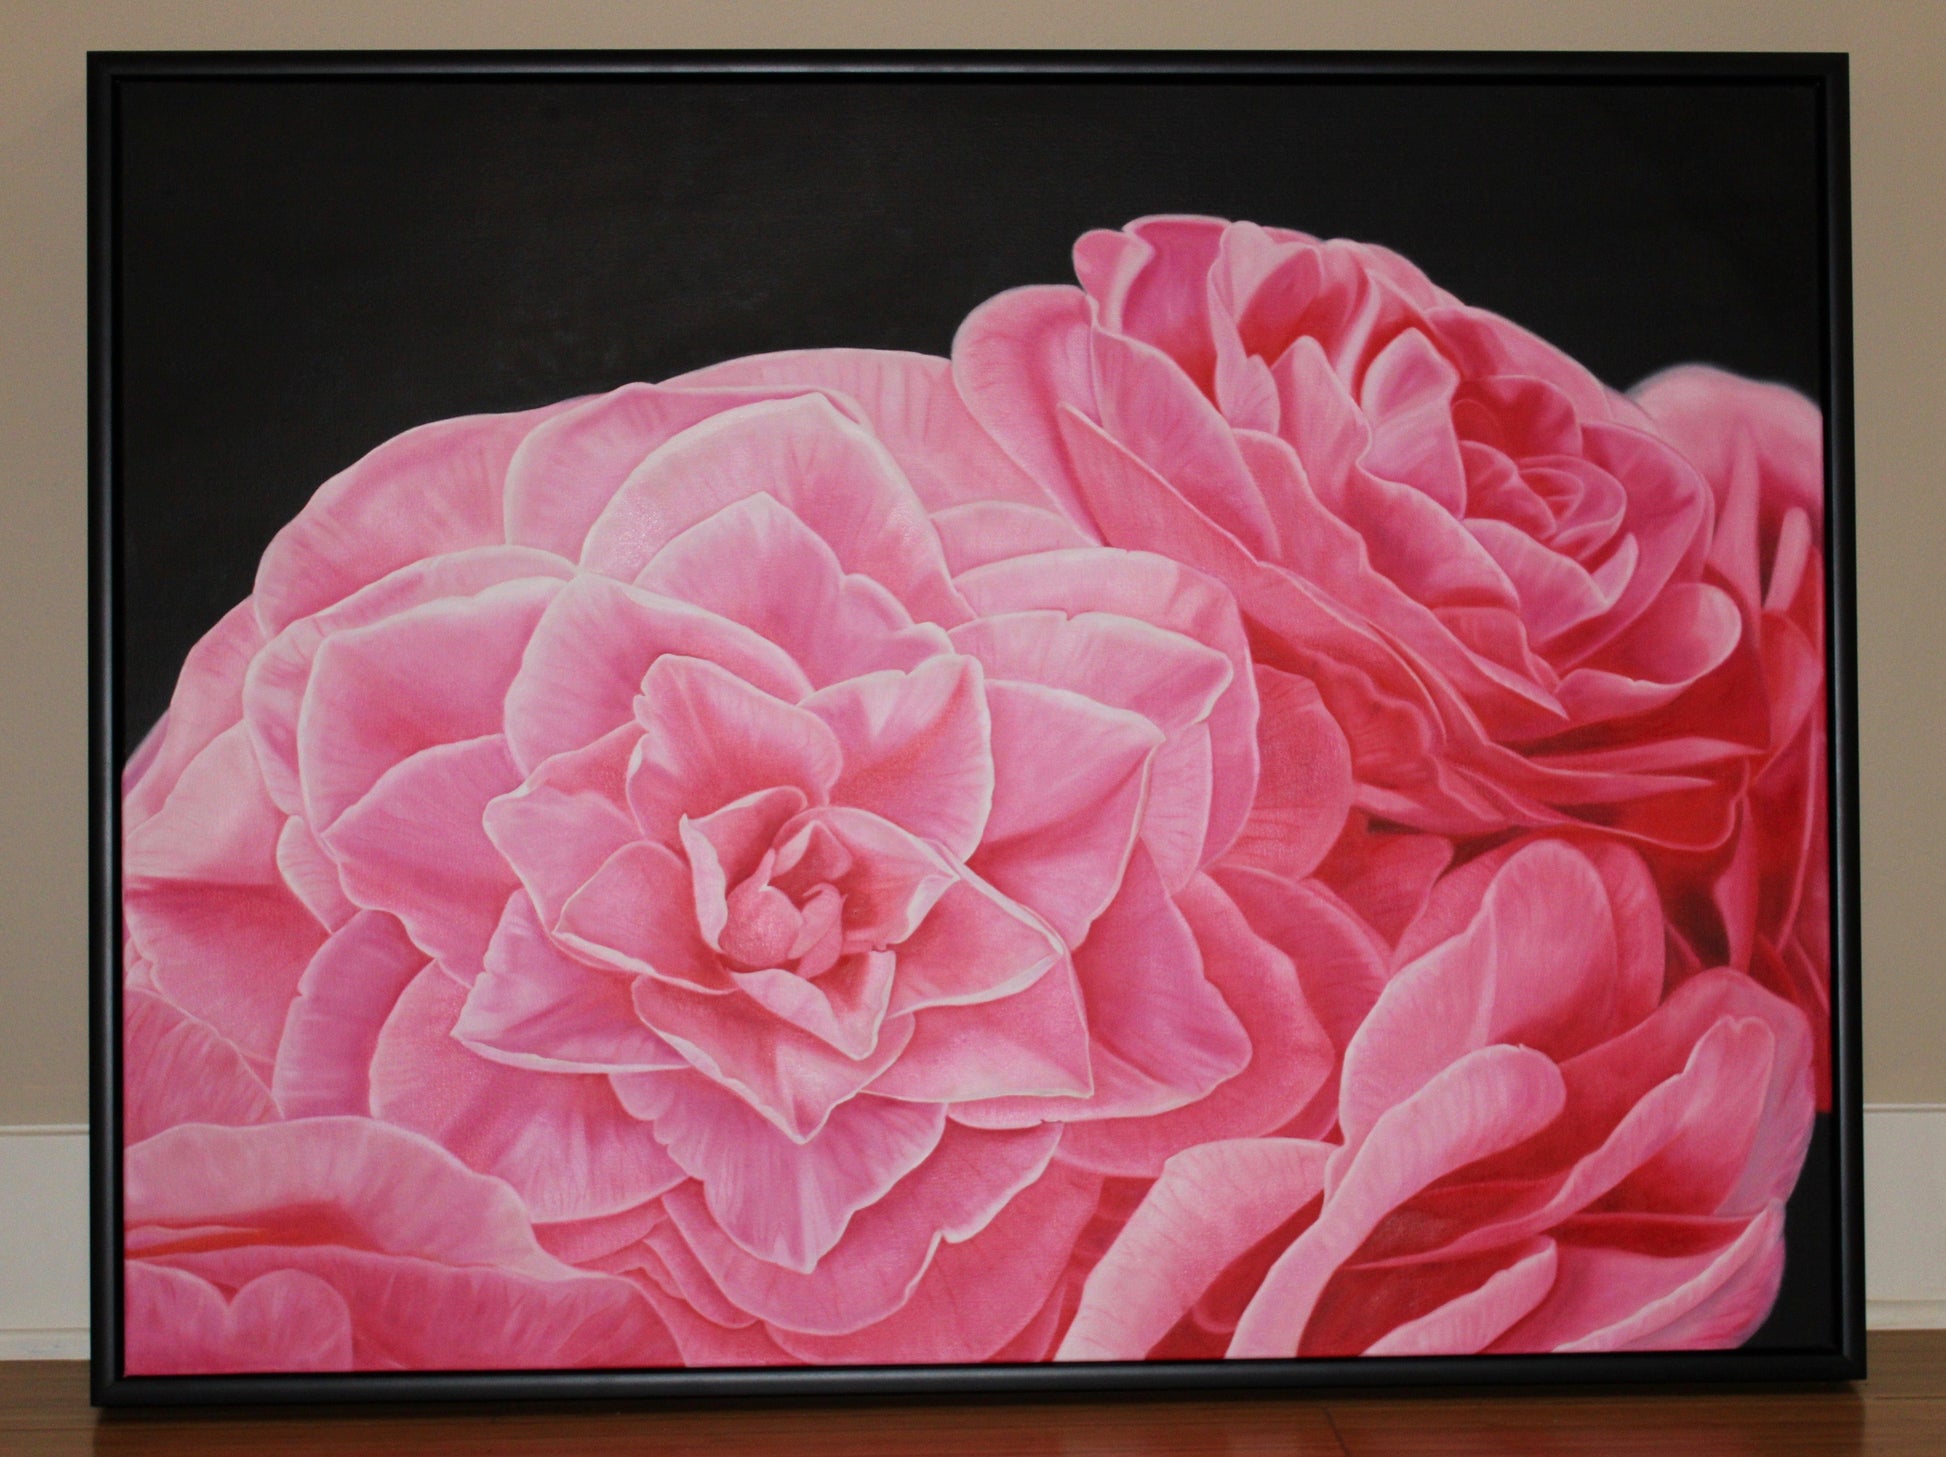 Floral Artwork Out of Love - Original Oil Painting by Shobika